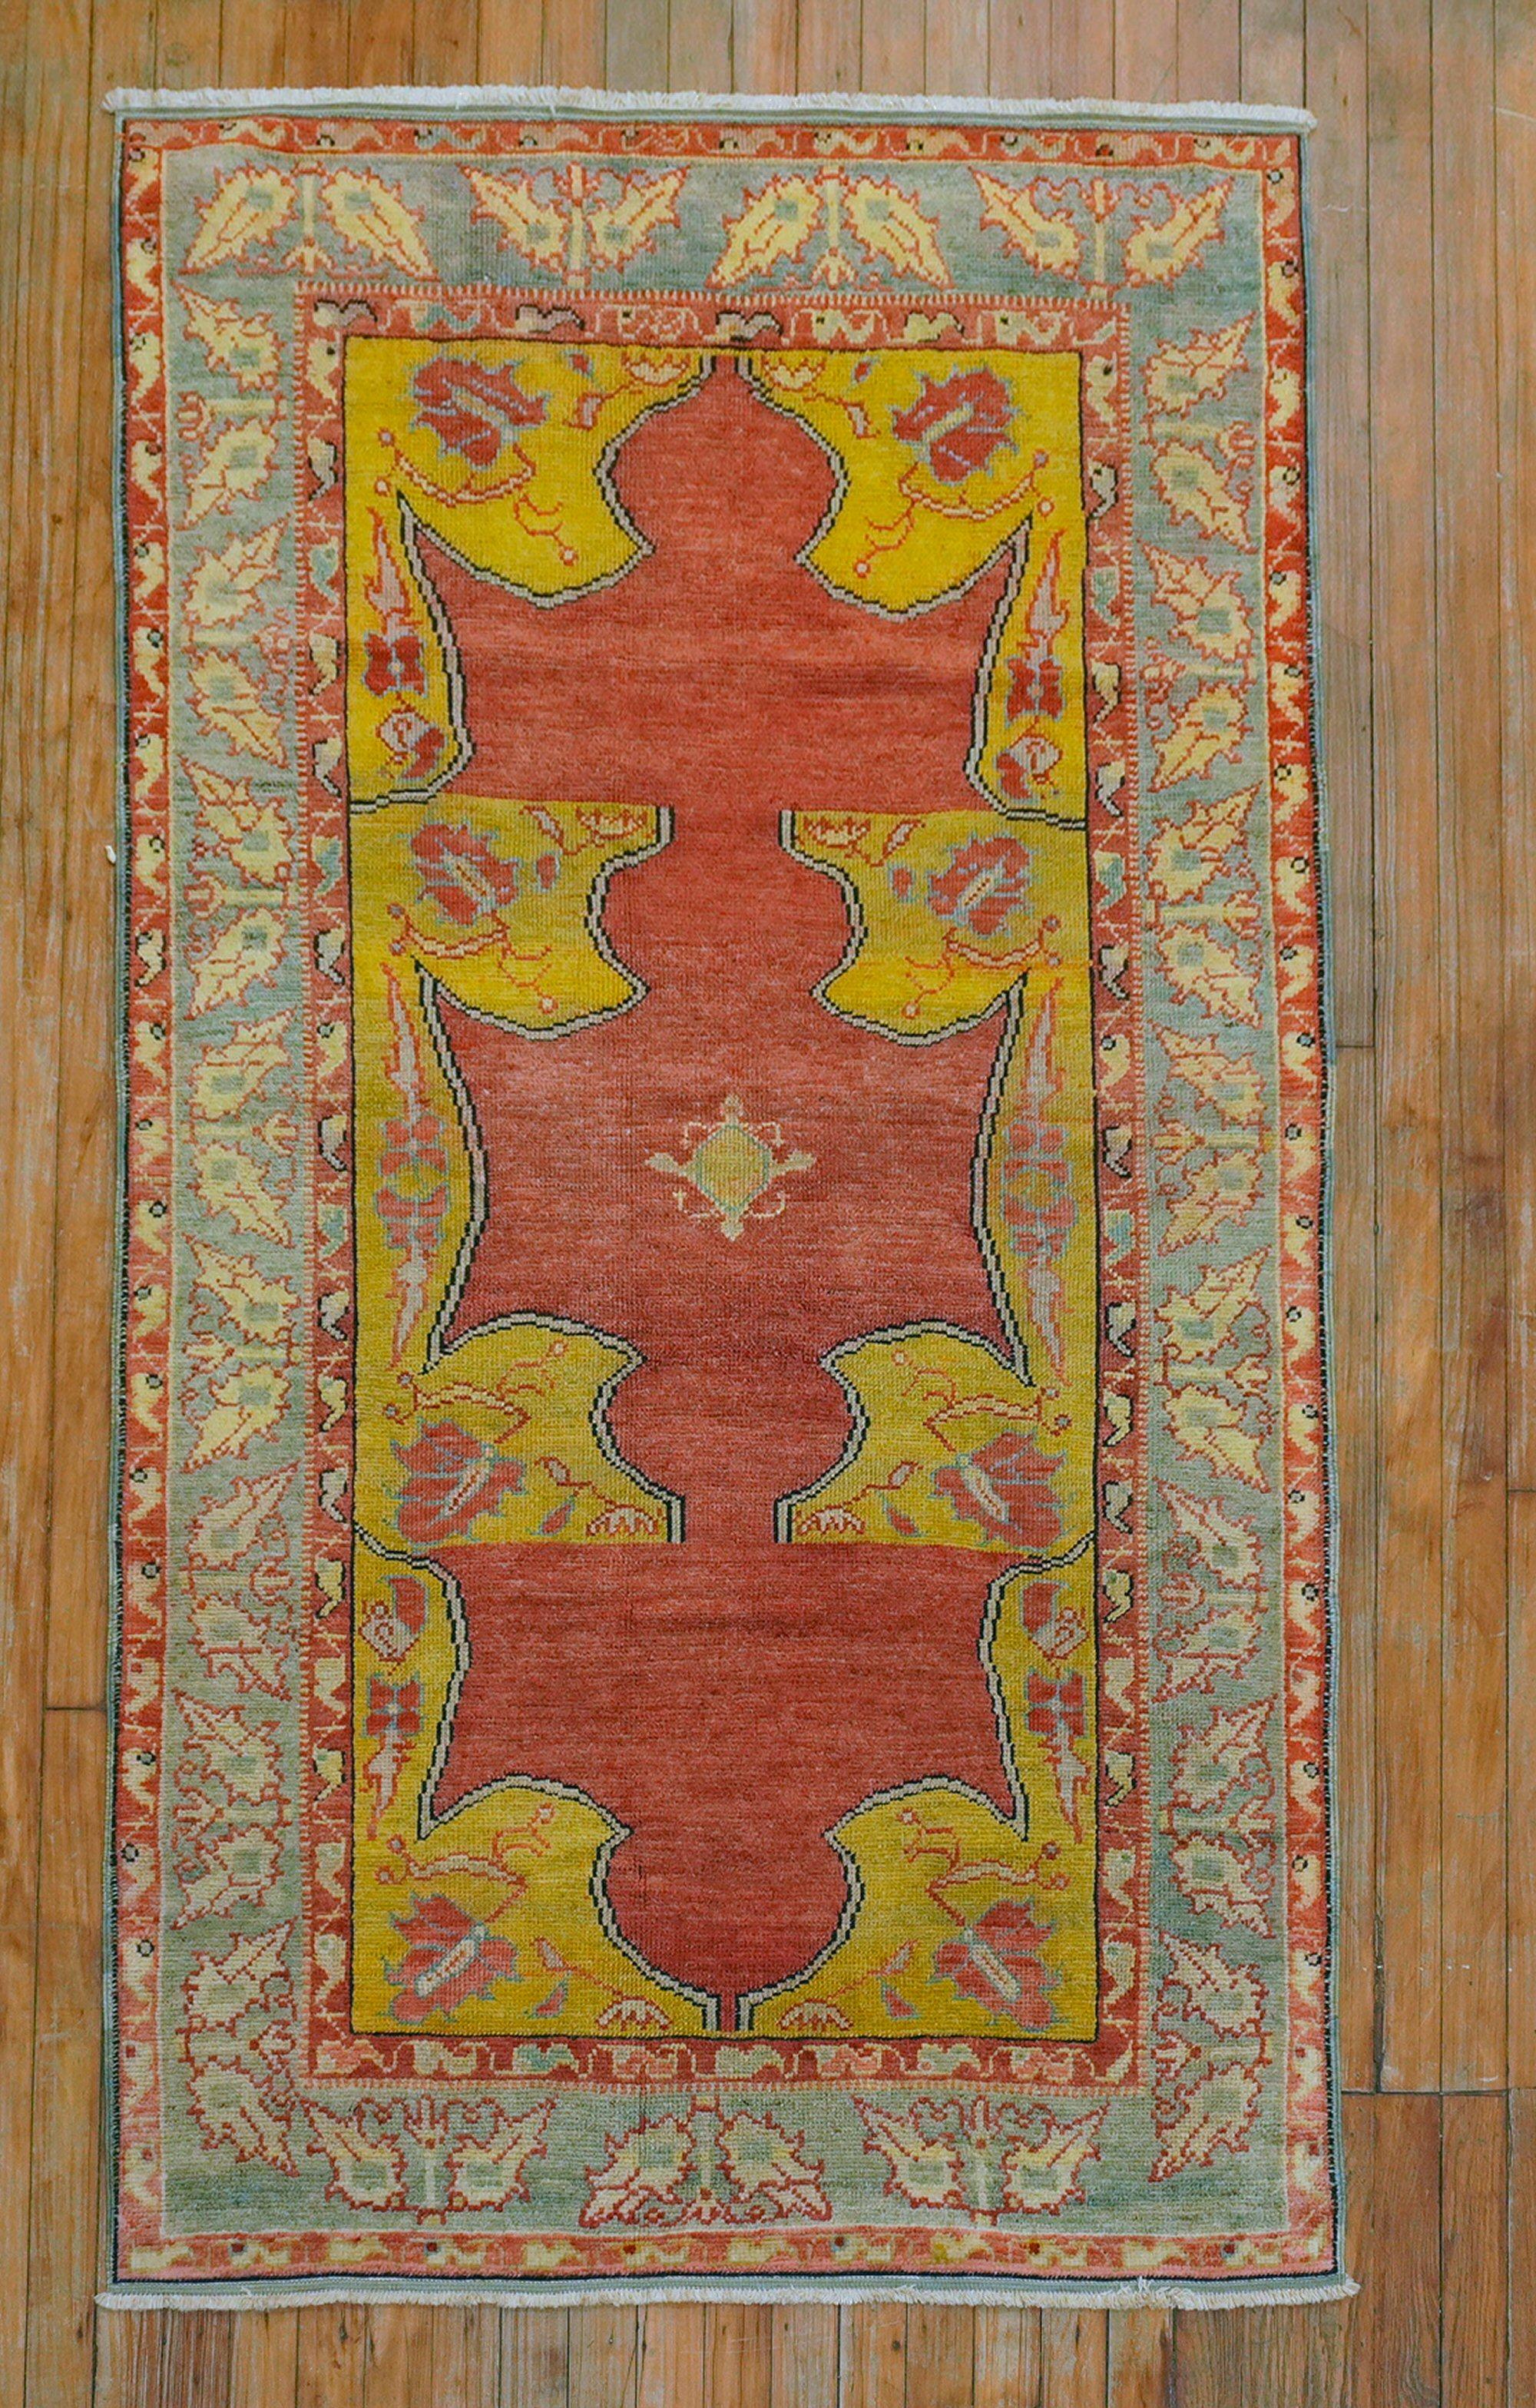 An early 20gh century Turkish Rug in dominant accents in yellow and red

Measures: 3'6'' x 6'3''.